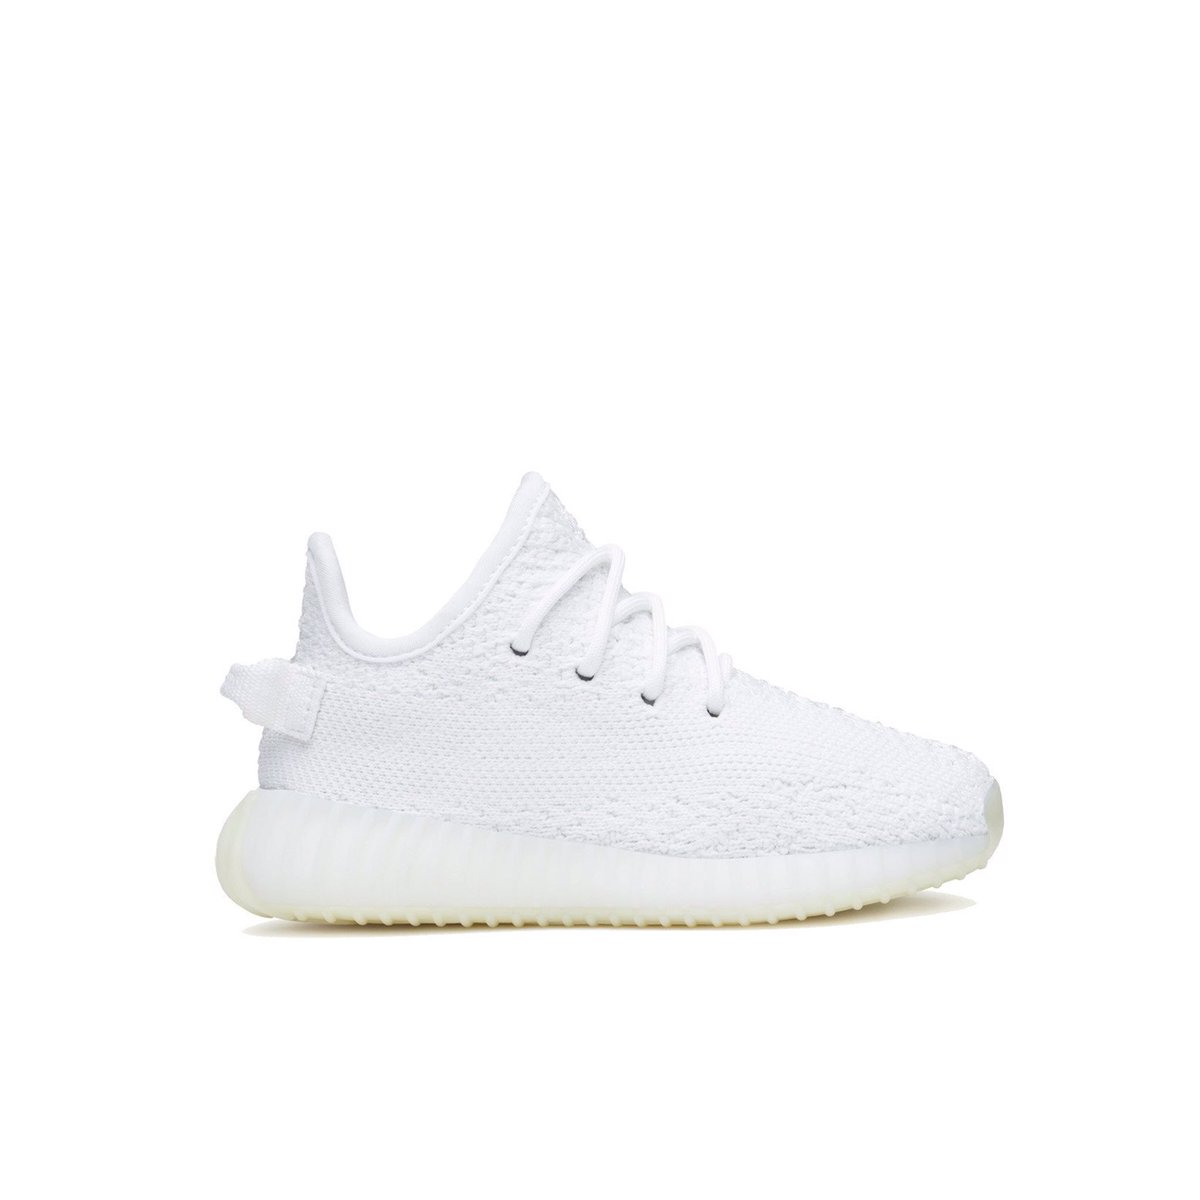 All white Yeezy 350's sizes toddler 5-10 available on https://t.co/BlGB6KQnnV dropping next week https://t.co/sZDQt4Y2DF